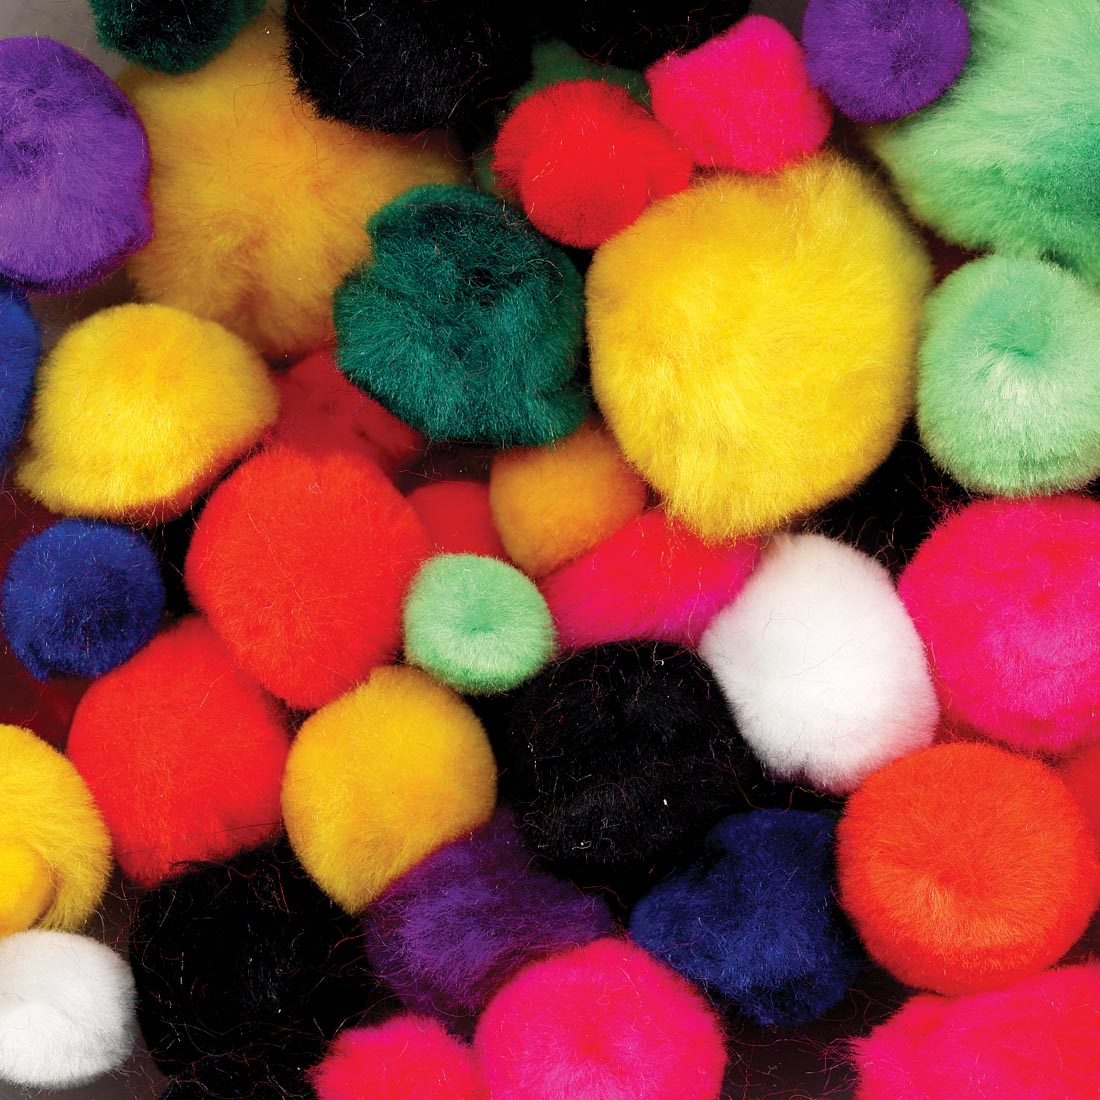 Pepperell Multi-color Craft Pom Poms (300 Pack) - image 1 of 2